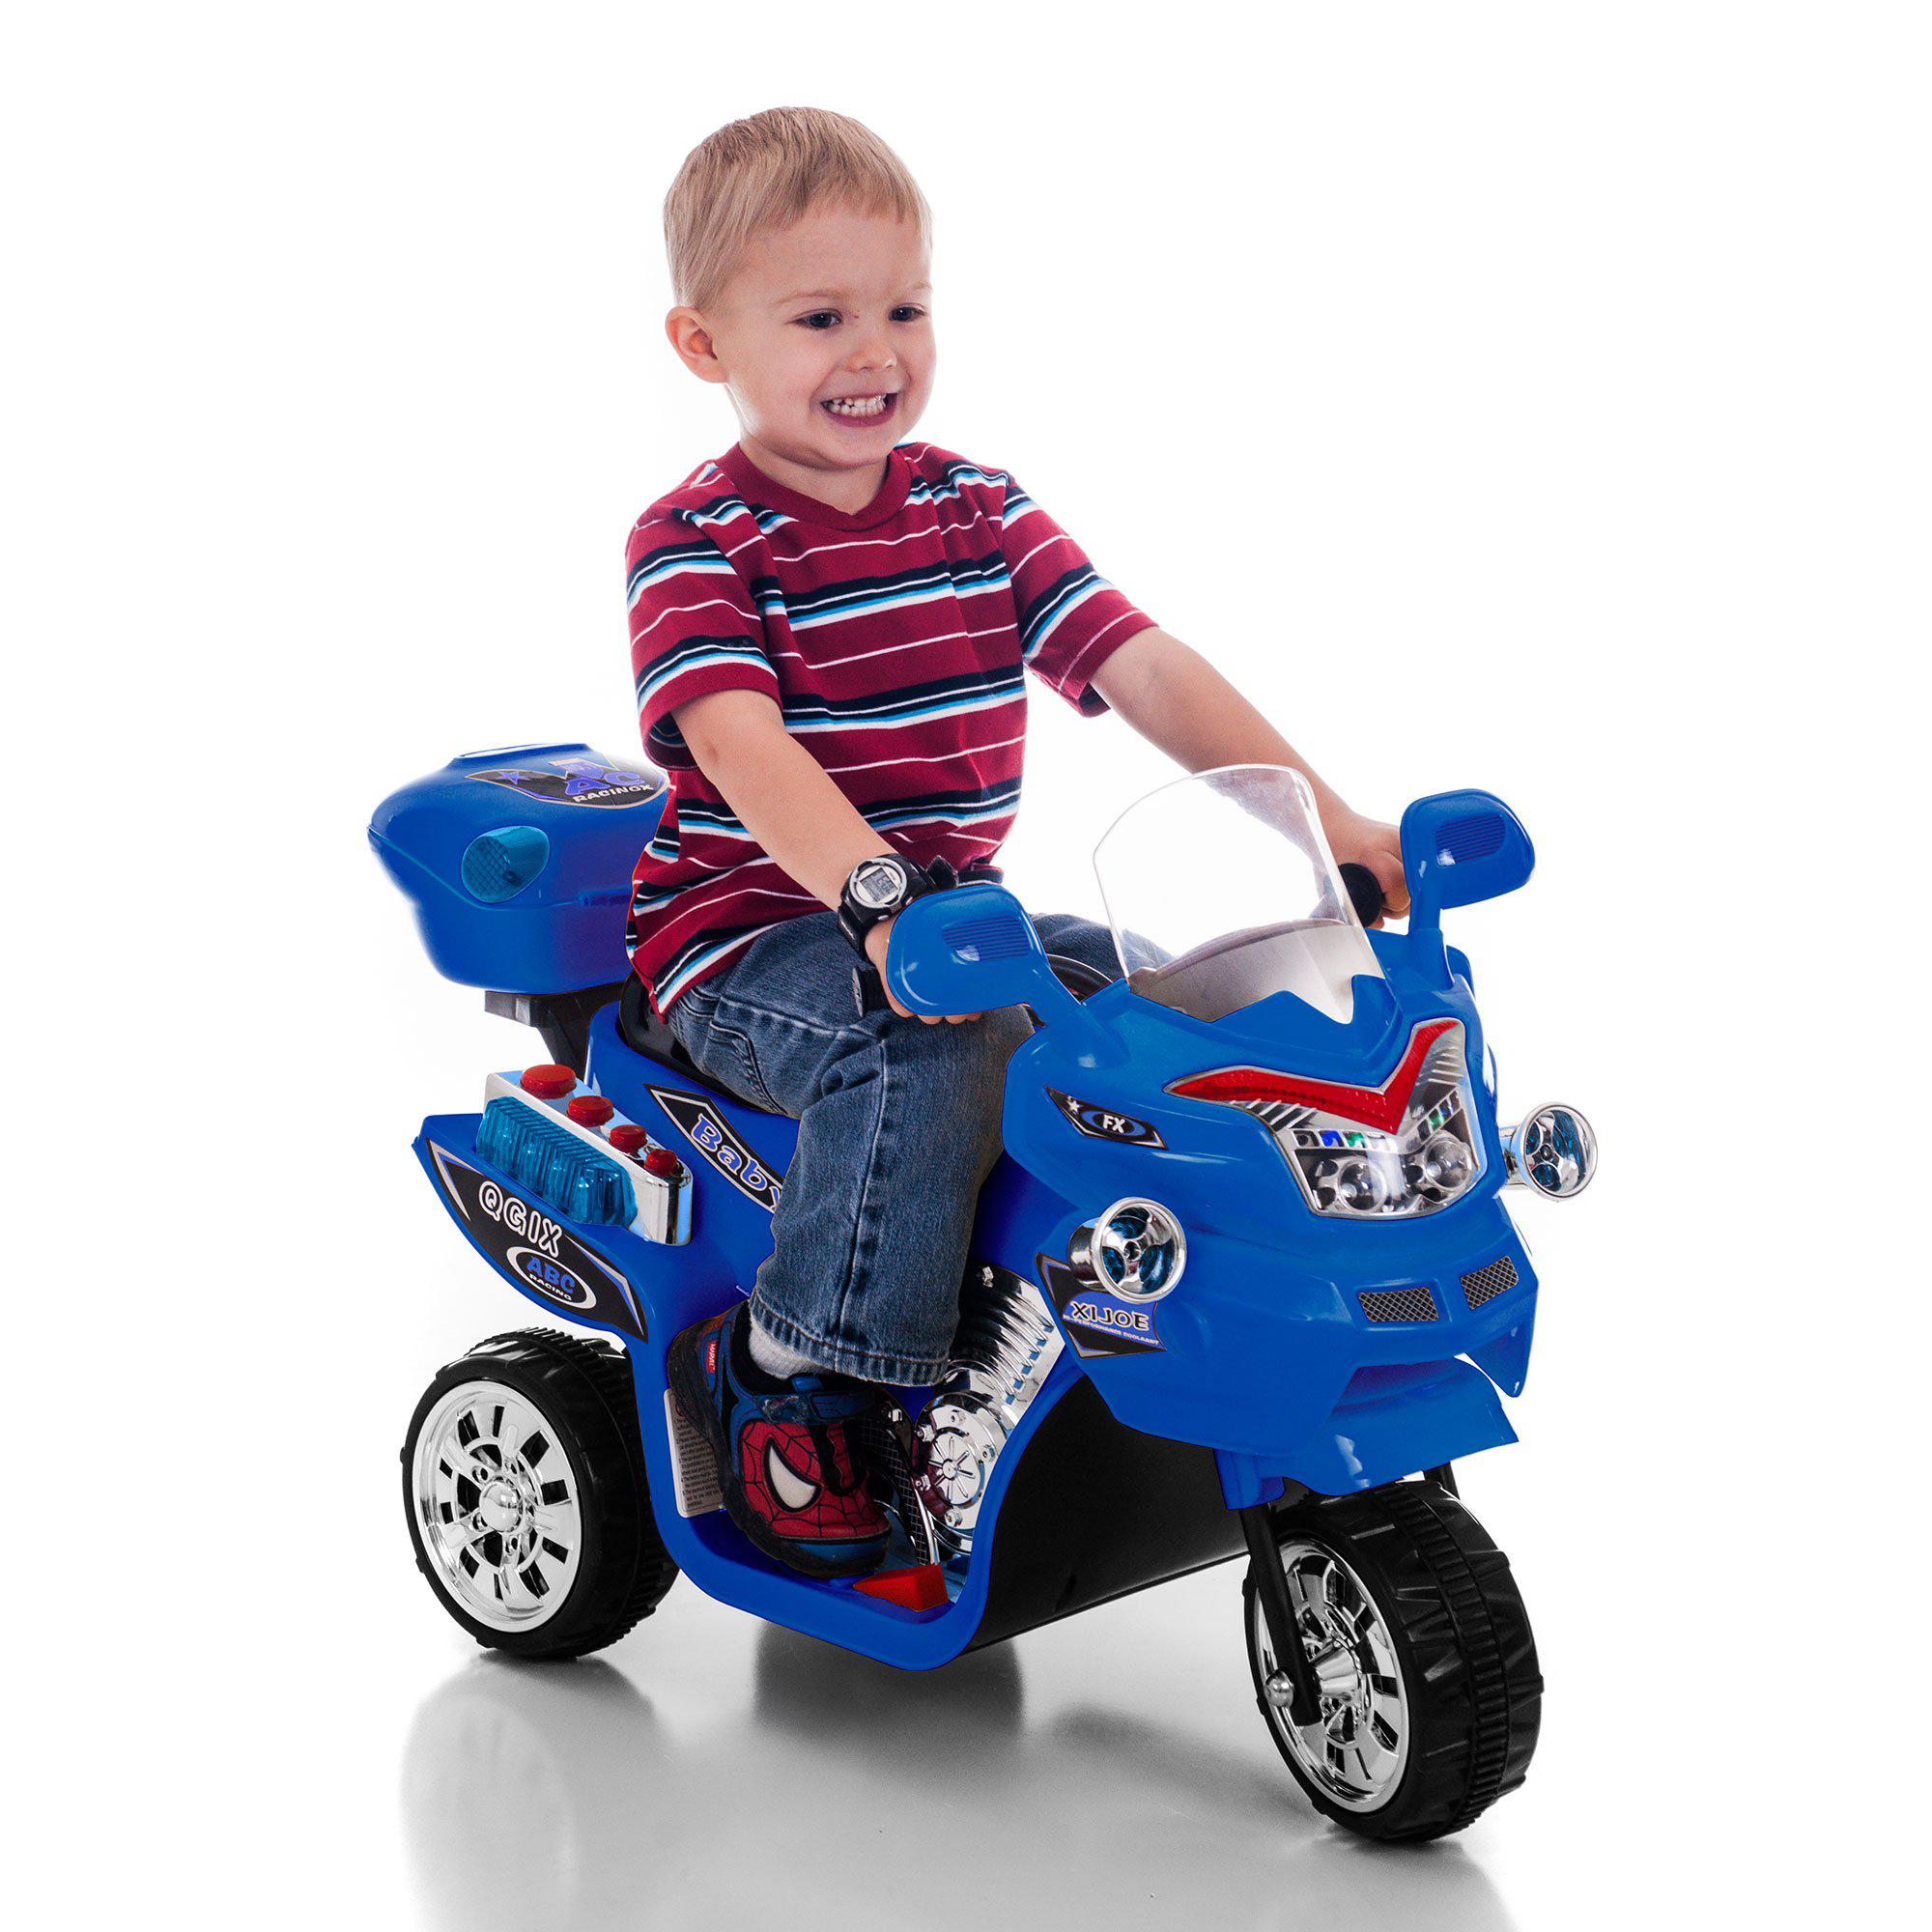 Lil\' Rider lil' rider electric motorcycle for kids - 3-wheel battery powered motorbike for kids ages 3 -6 - fun decals, reverse, and hea